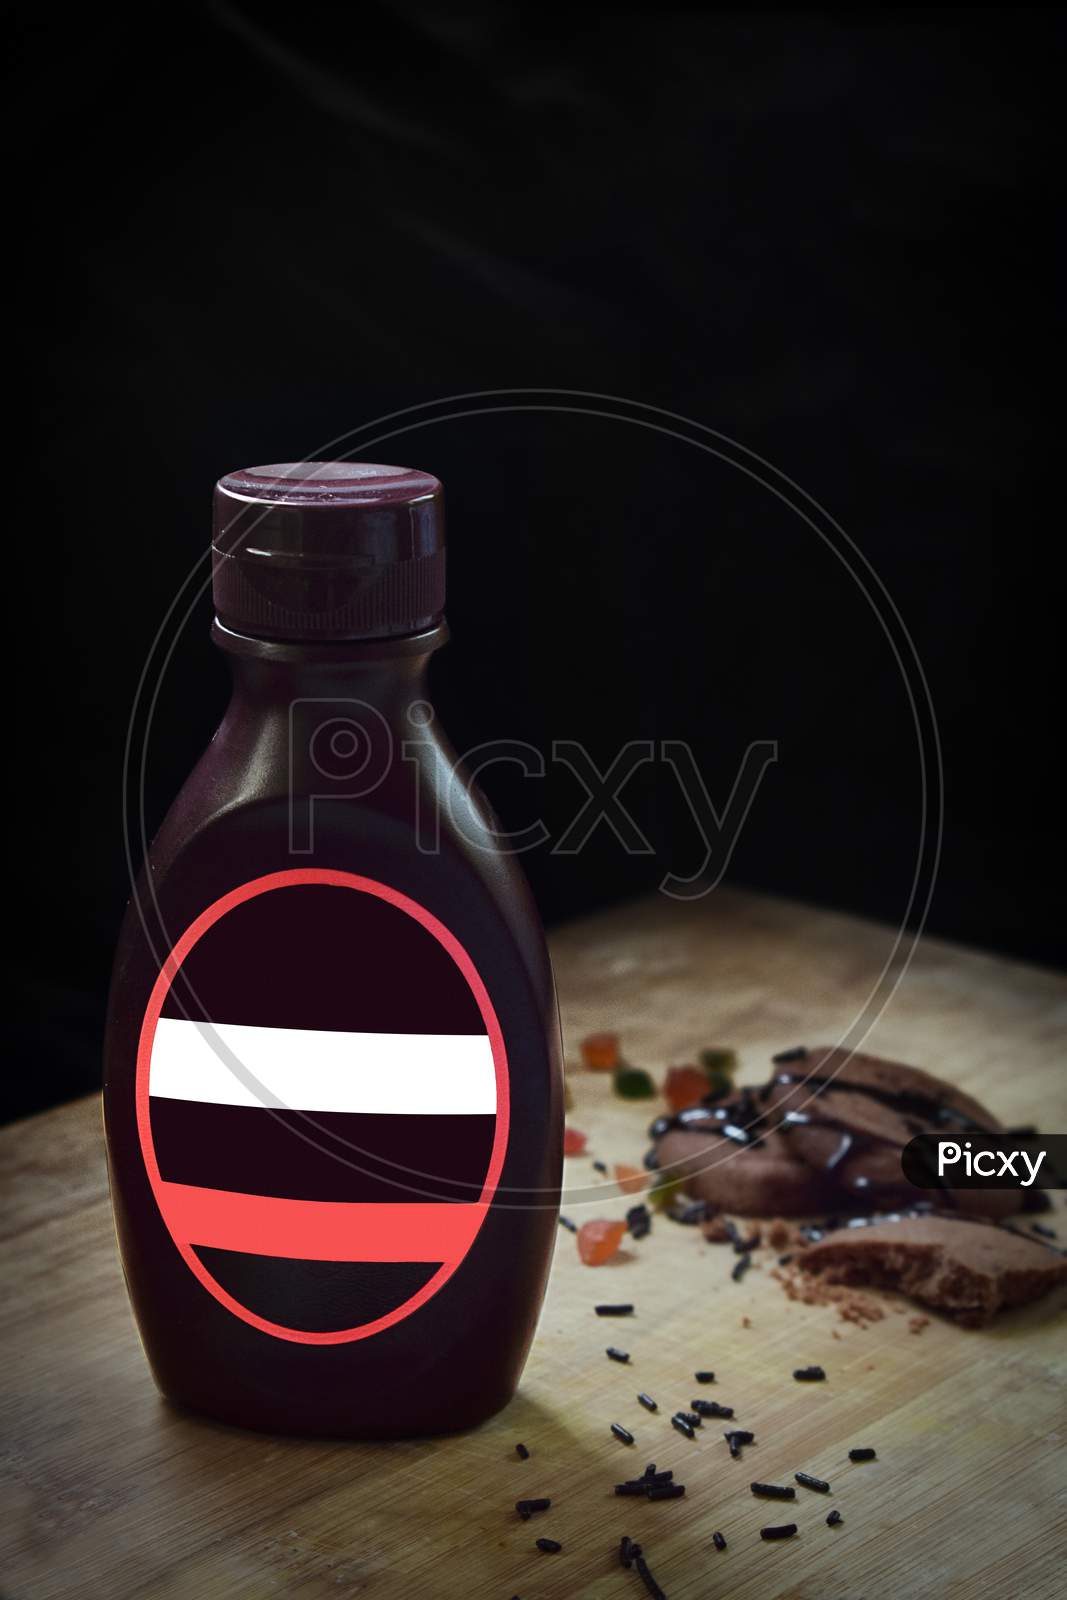 A chocolate sauce bottle without any tag of company with dark black background.